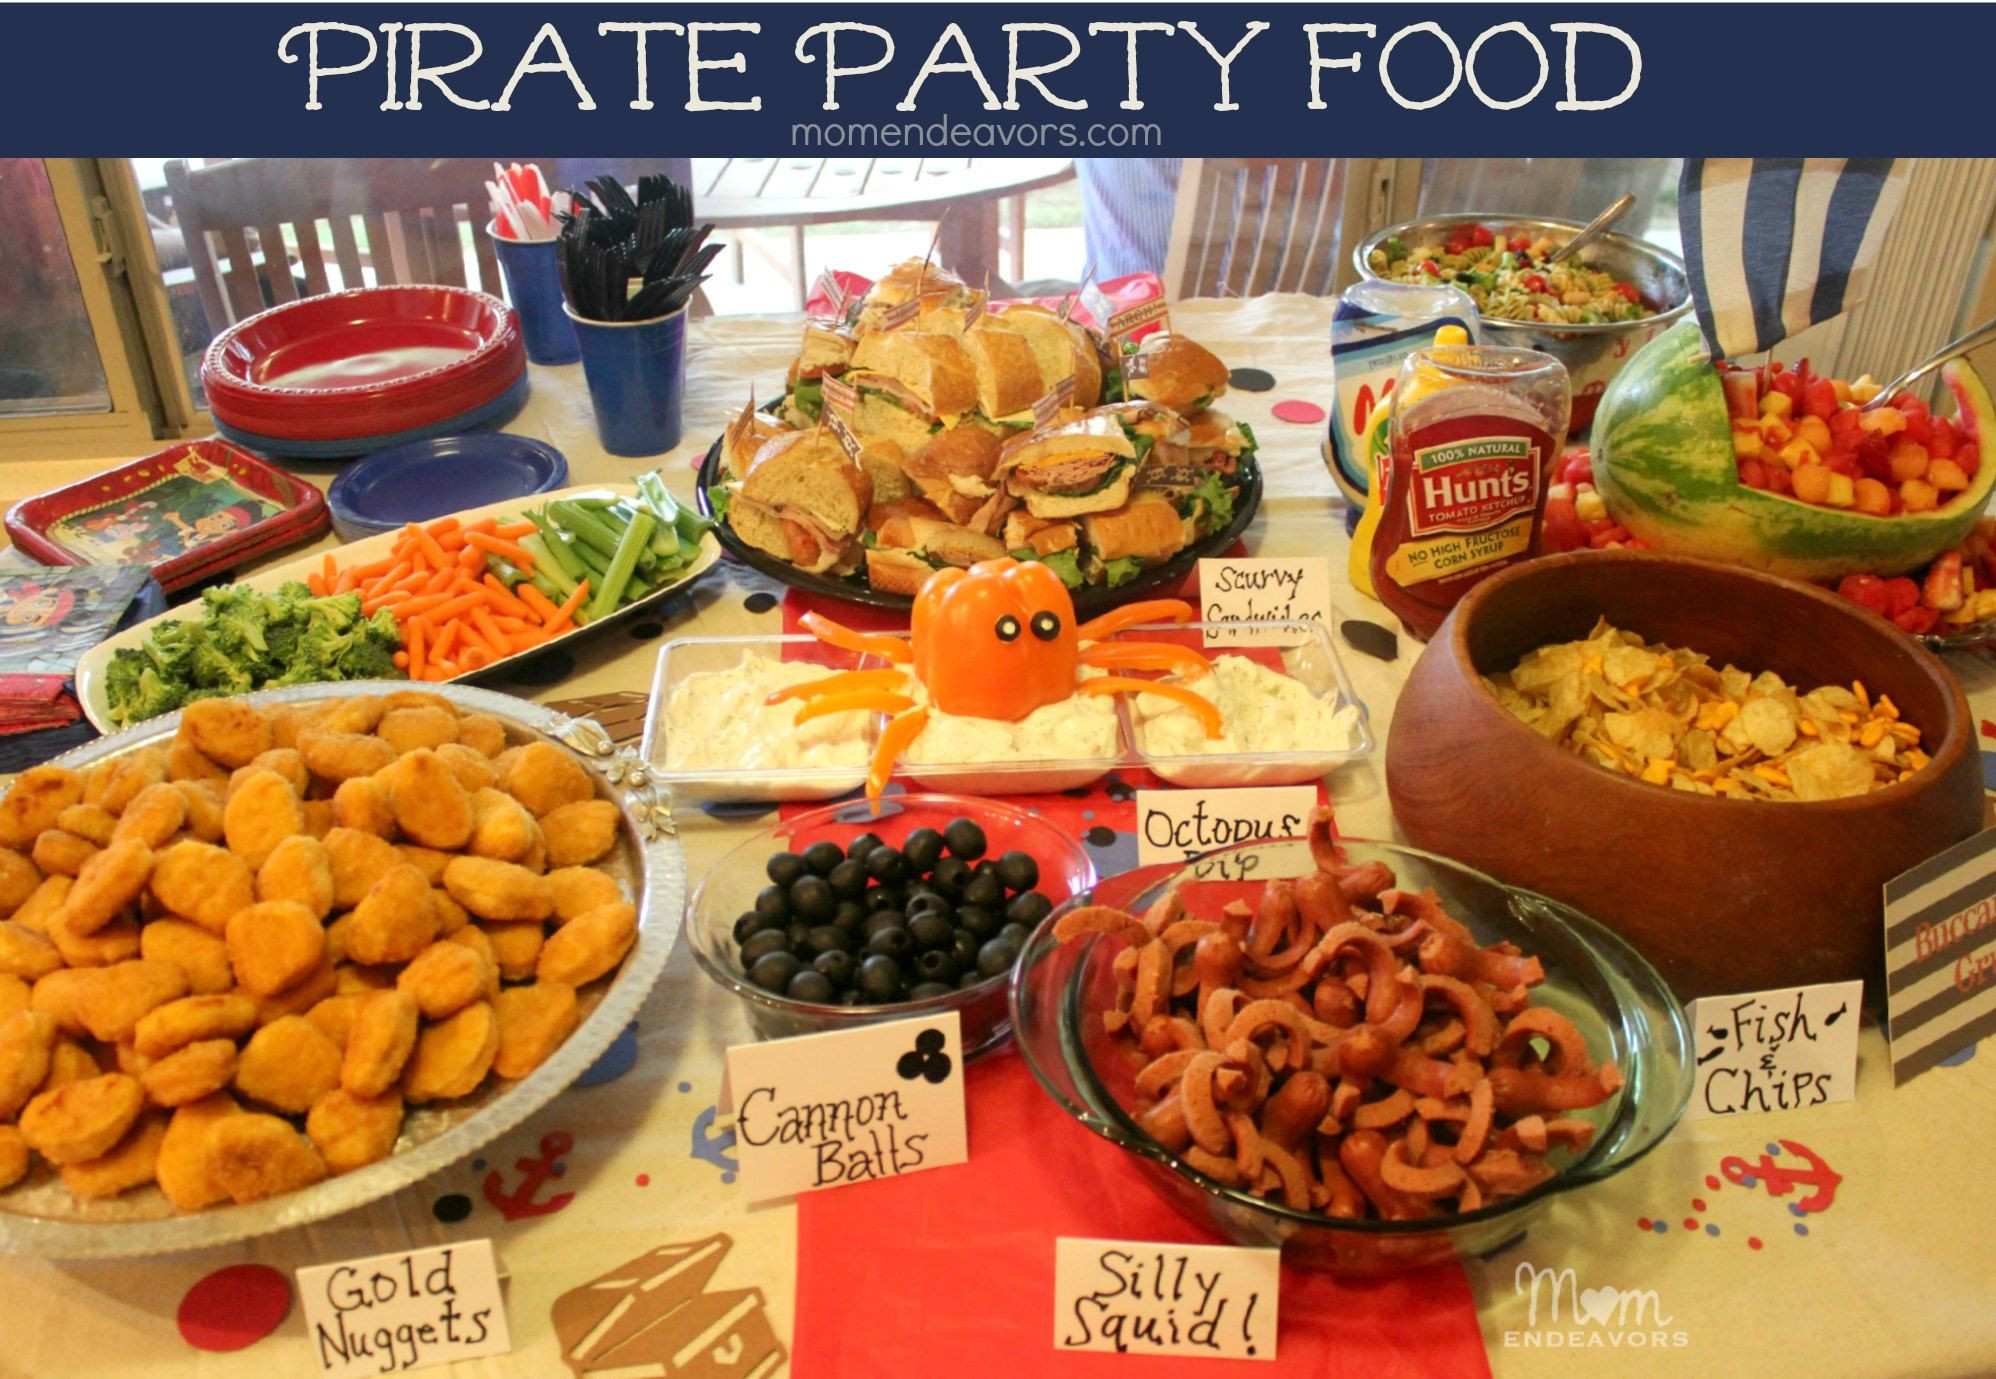 3Rd Birthday Party Food Ideas
 Jake and the Never Land Pirates Birthday Party Food Ideas